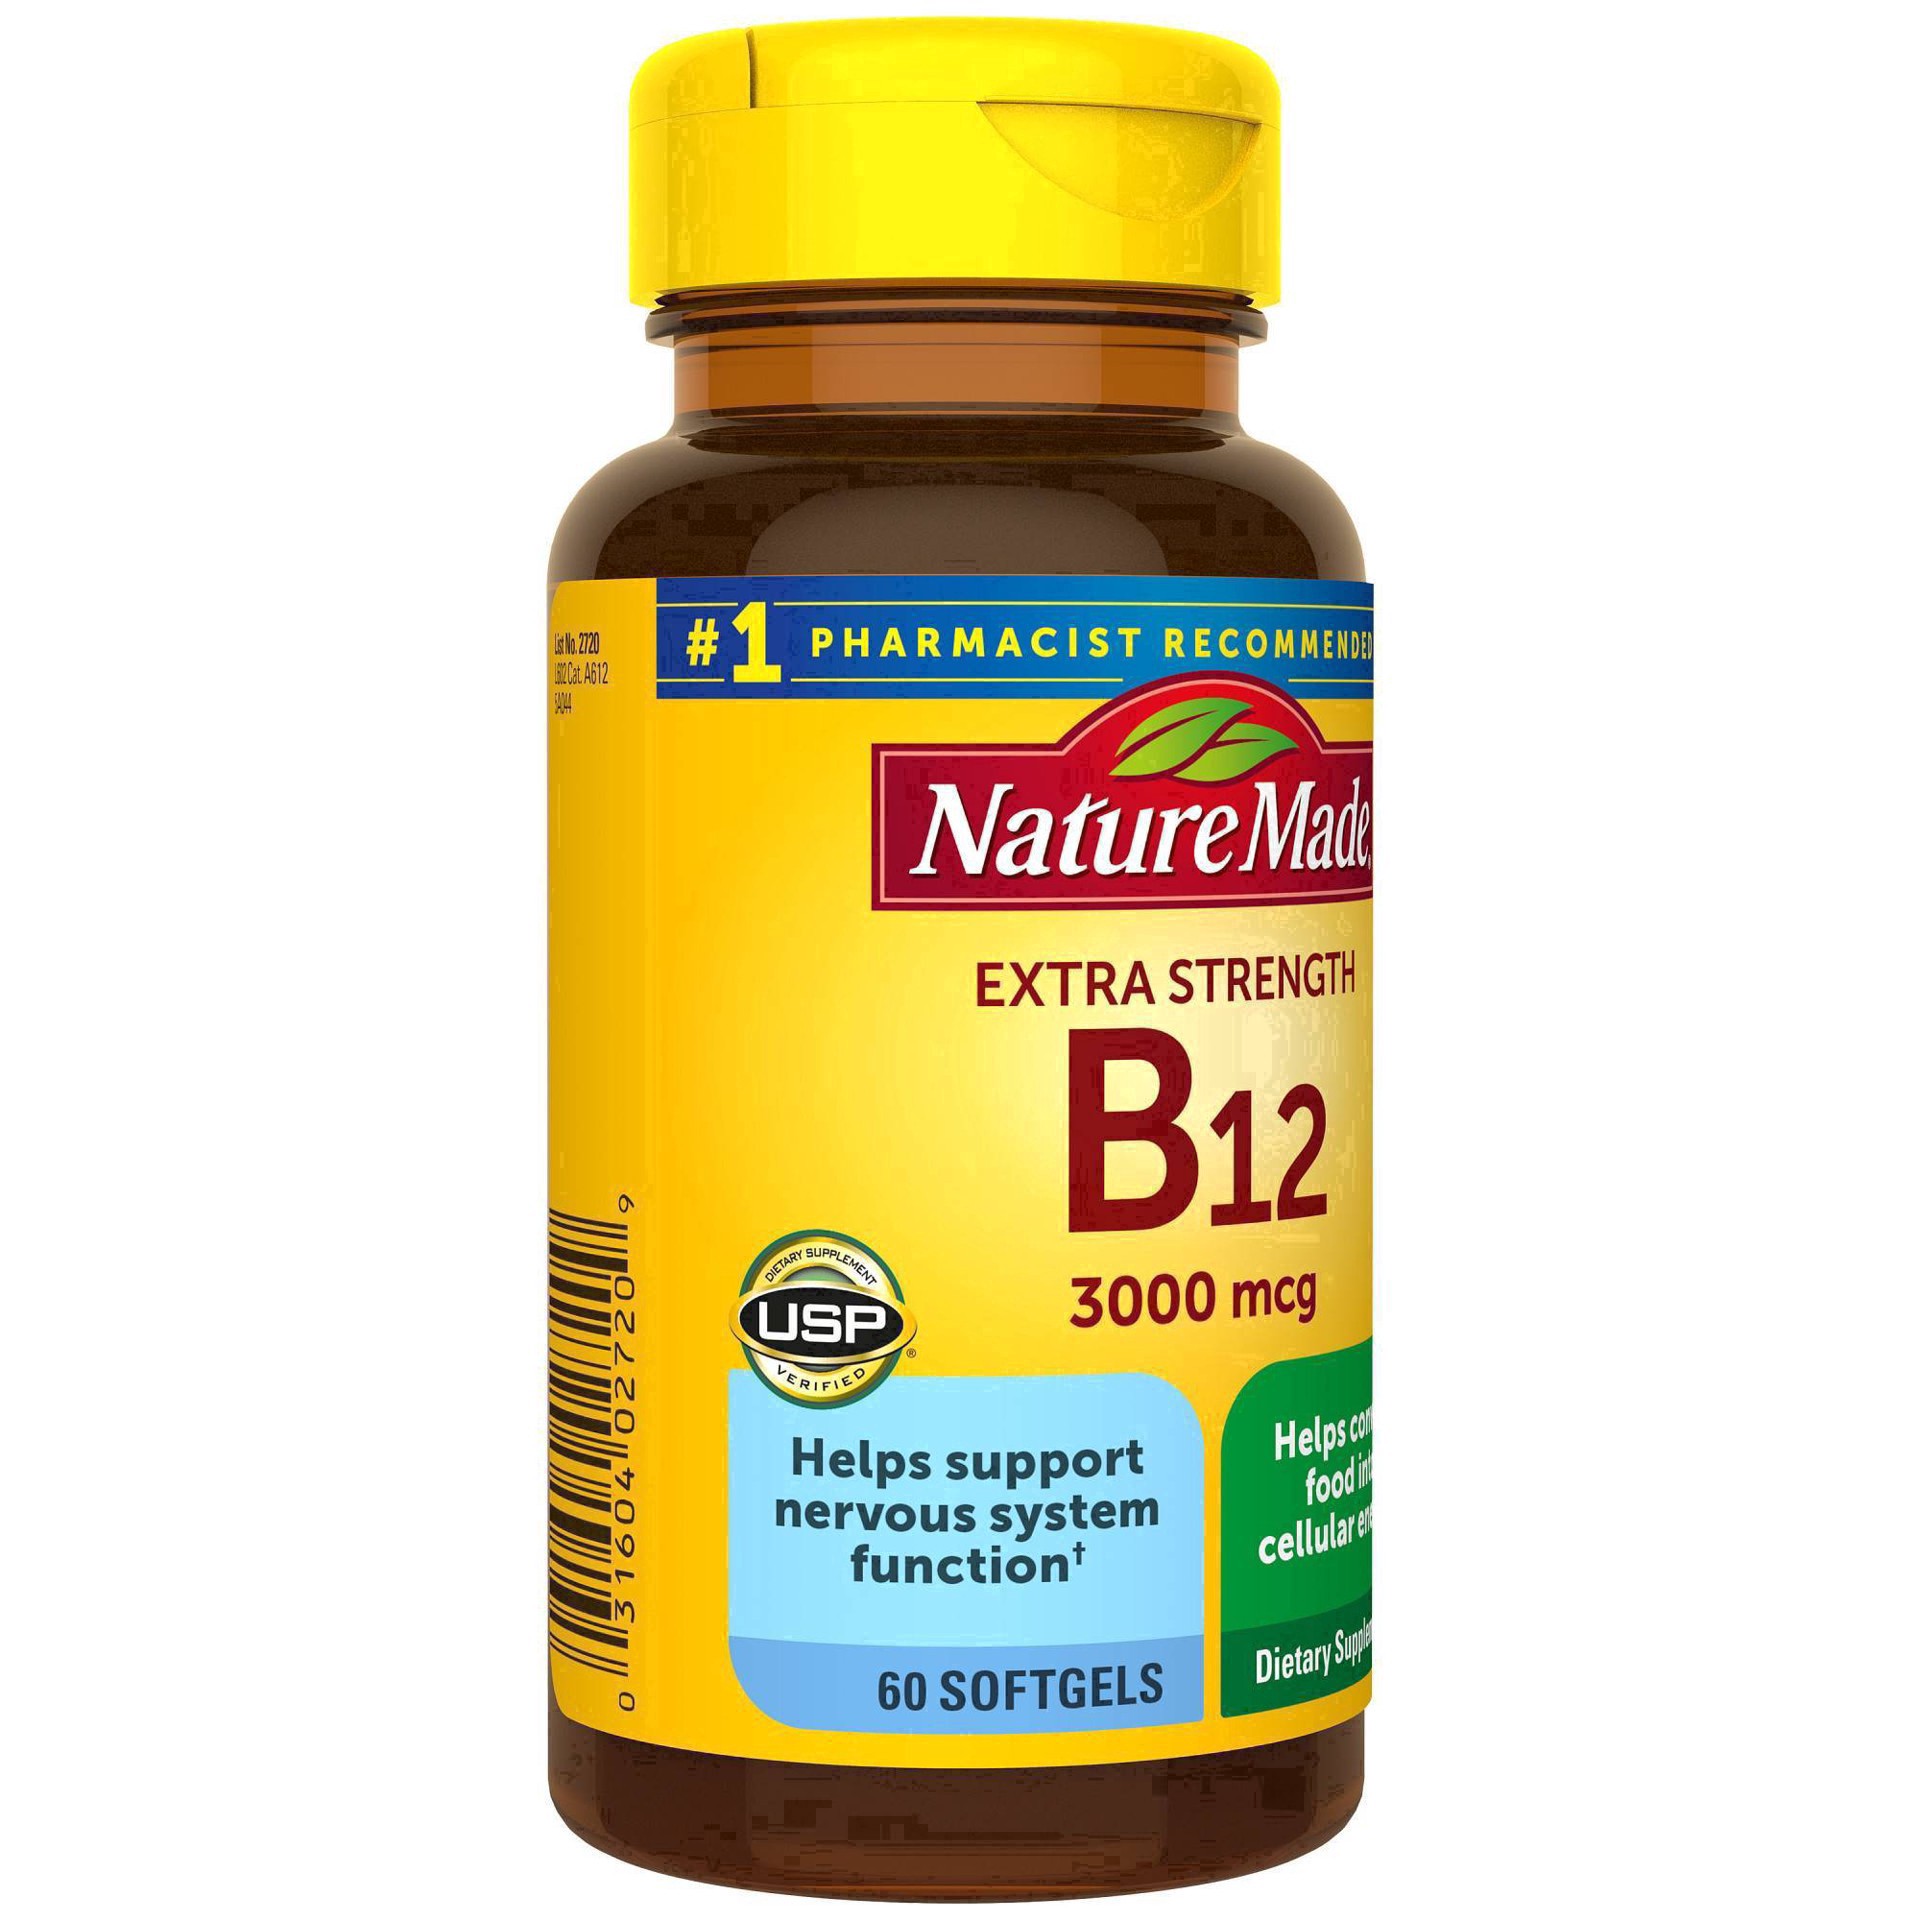 slide 22 of 74, Nature Made Extra Strength Vitamin B12 3000 mcg Energy Metabolism Support Softgels - 60ct, 60 ct